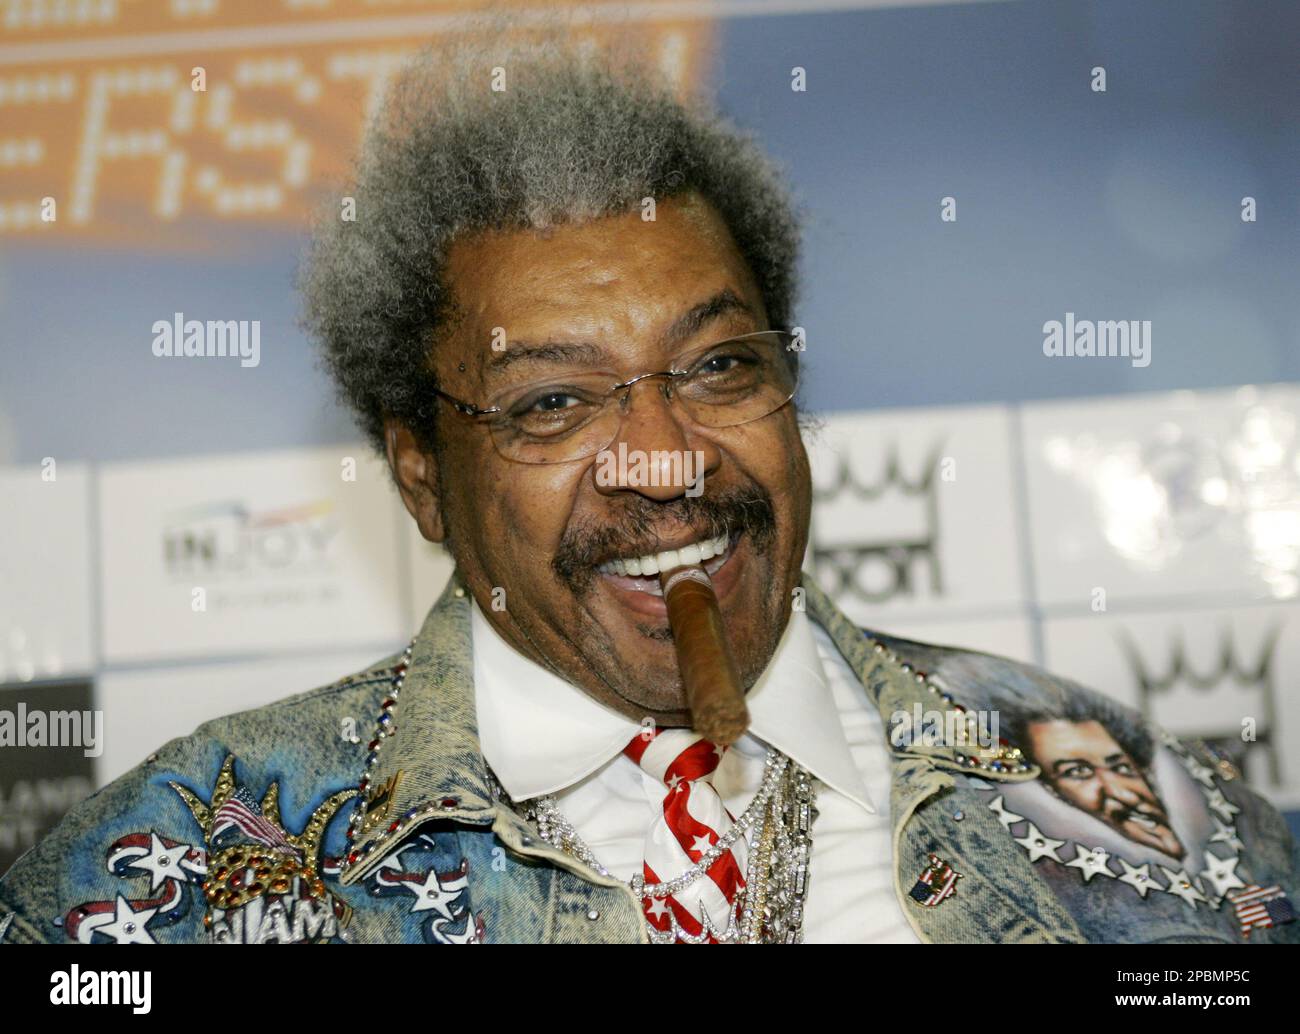 us-box-promoter-don-king-smiles-with-a-cigar-between-his-teeth-during-a-press-conference-for-the-wba-heavyweight-world-championship-fight-between-current-world-champion-nikolai-valuev-from-russia-and-his-challenger-ruslan-chagaev-from-uzbekistan-in-stuttgart-southwestern-germany-thursday-april-12-2007-the-fight-will-take-place-in-stuttgart-on-saturday-april-14-2007-ap-photothomas-kienzle-2PBMP5C.jpg